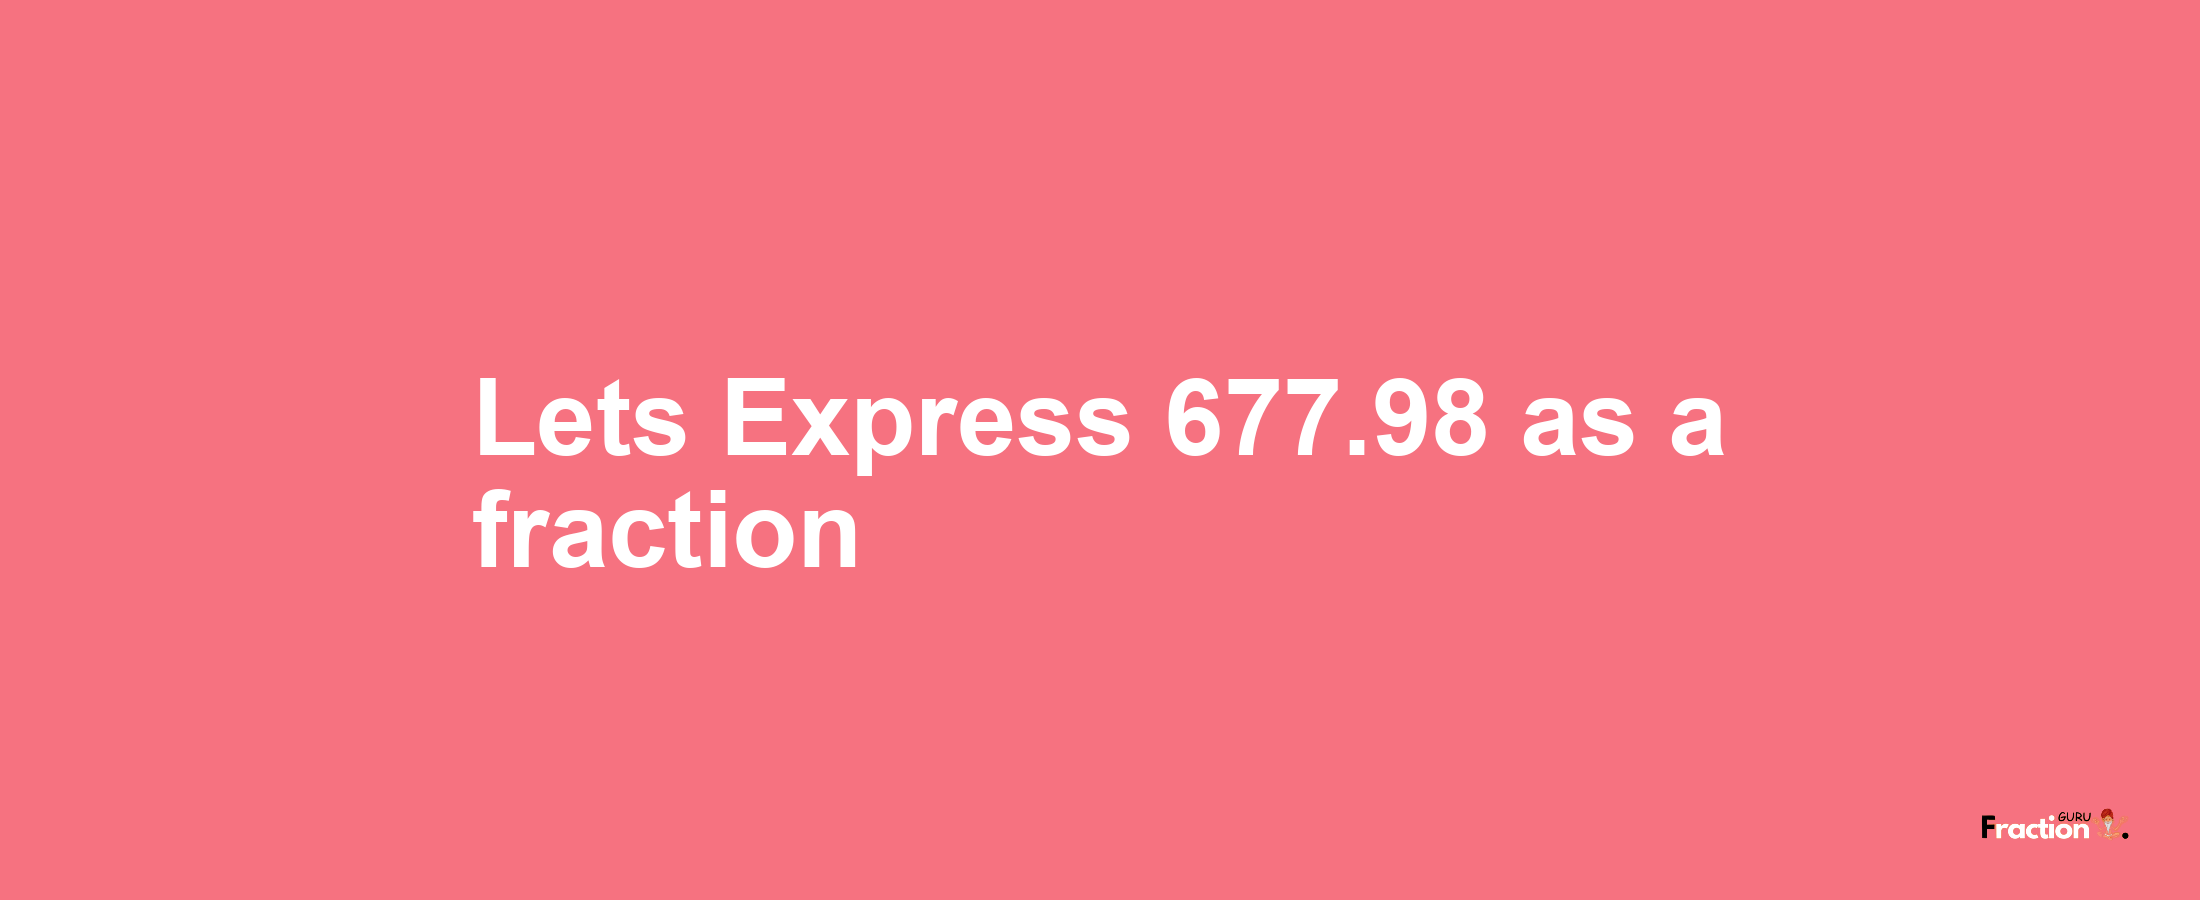 Lets Express 677.98 as afraction